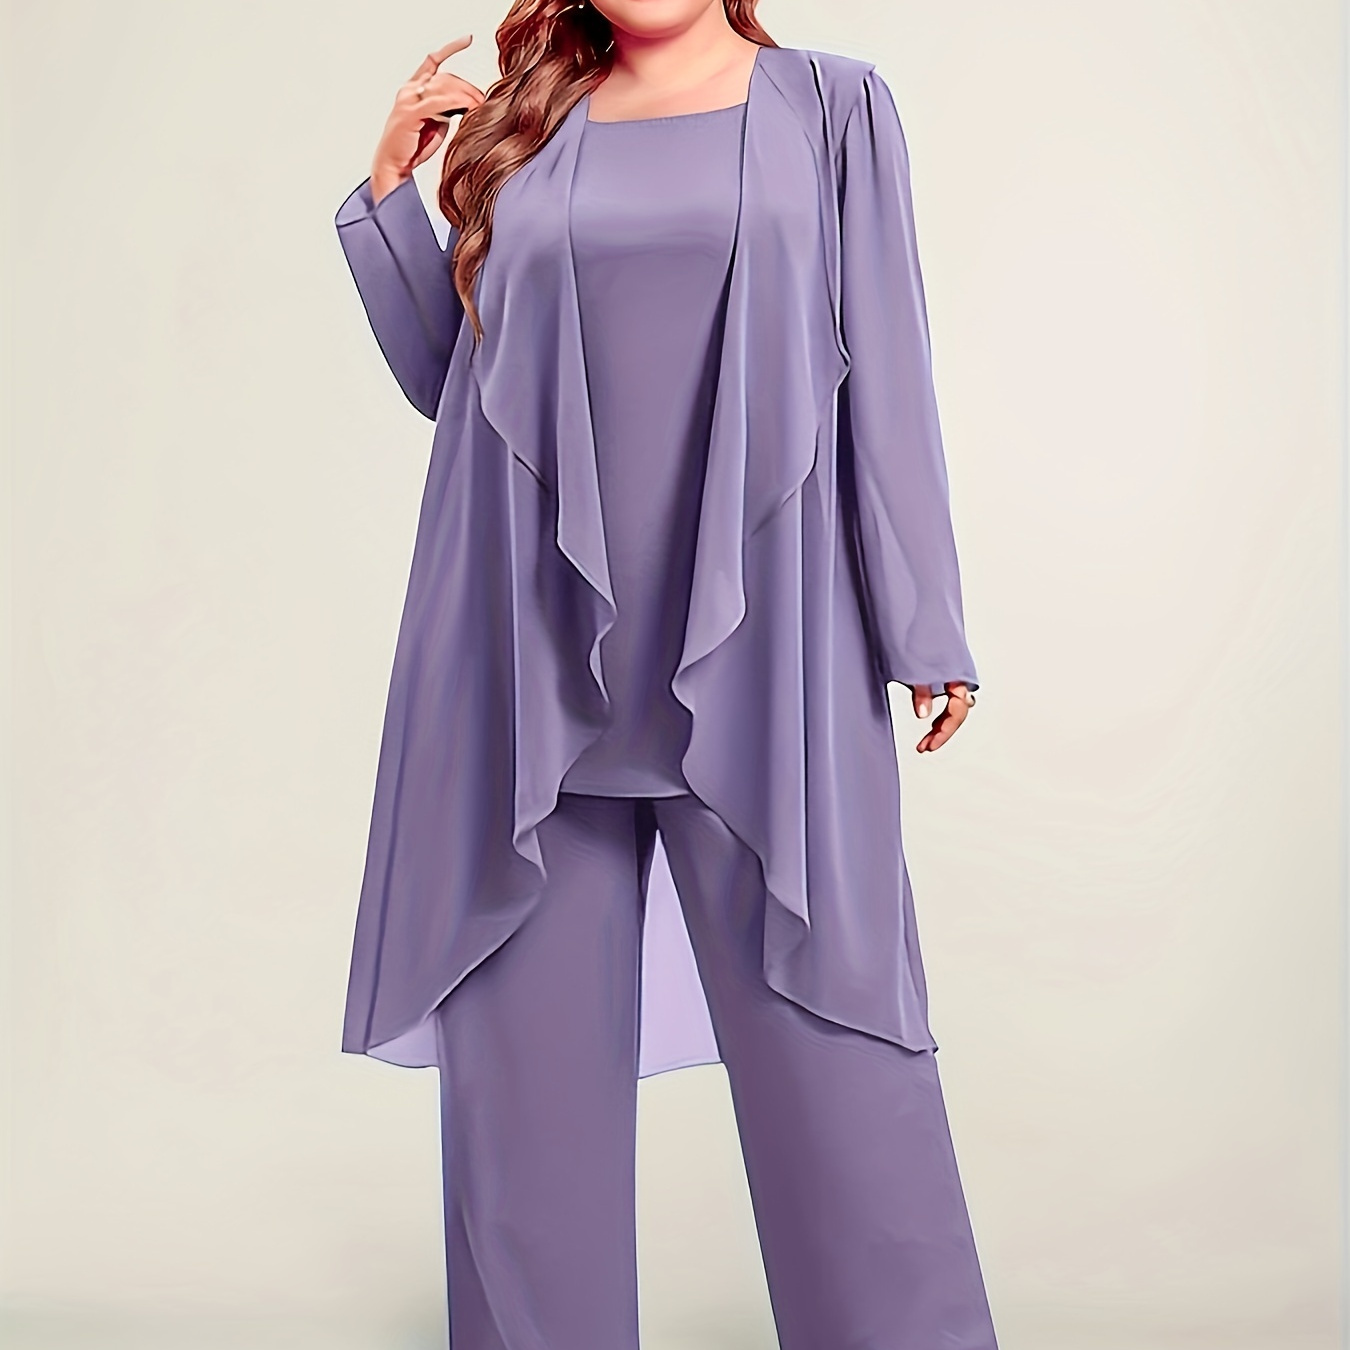 

Plus Size Simple Solid Three-piece Set, Crew Neck Tank Top + Pants + Open Front Top Outfits, Women's Plus Size clothing